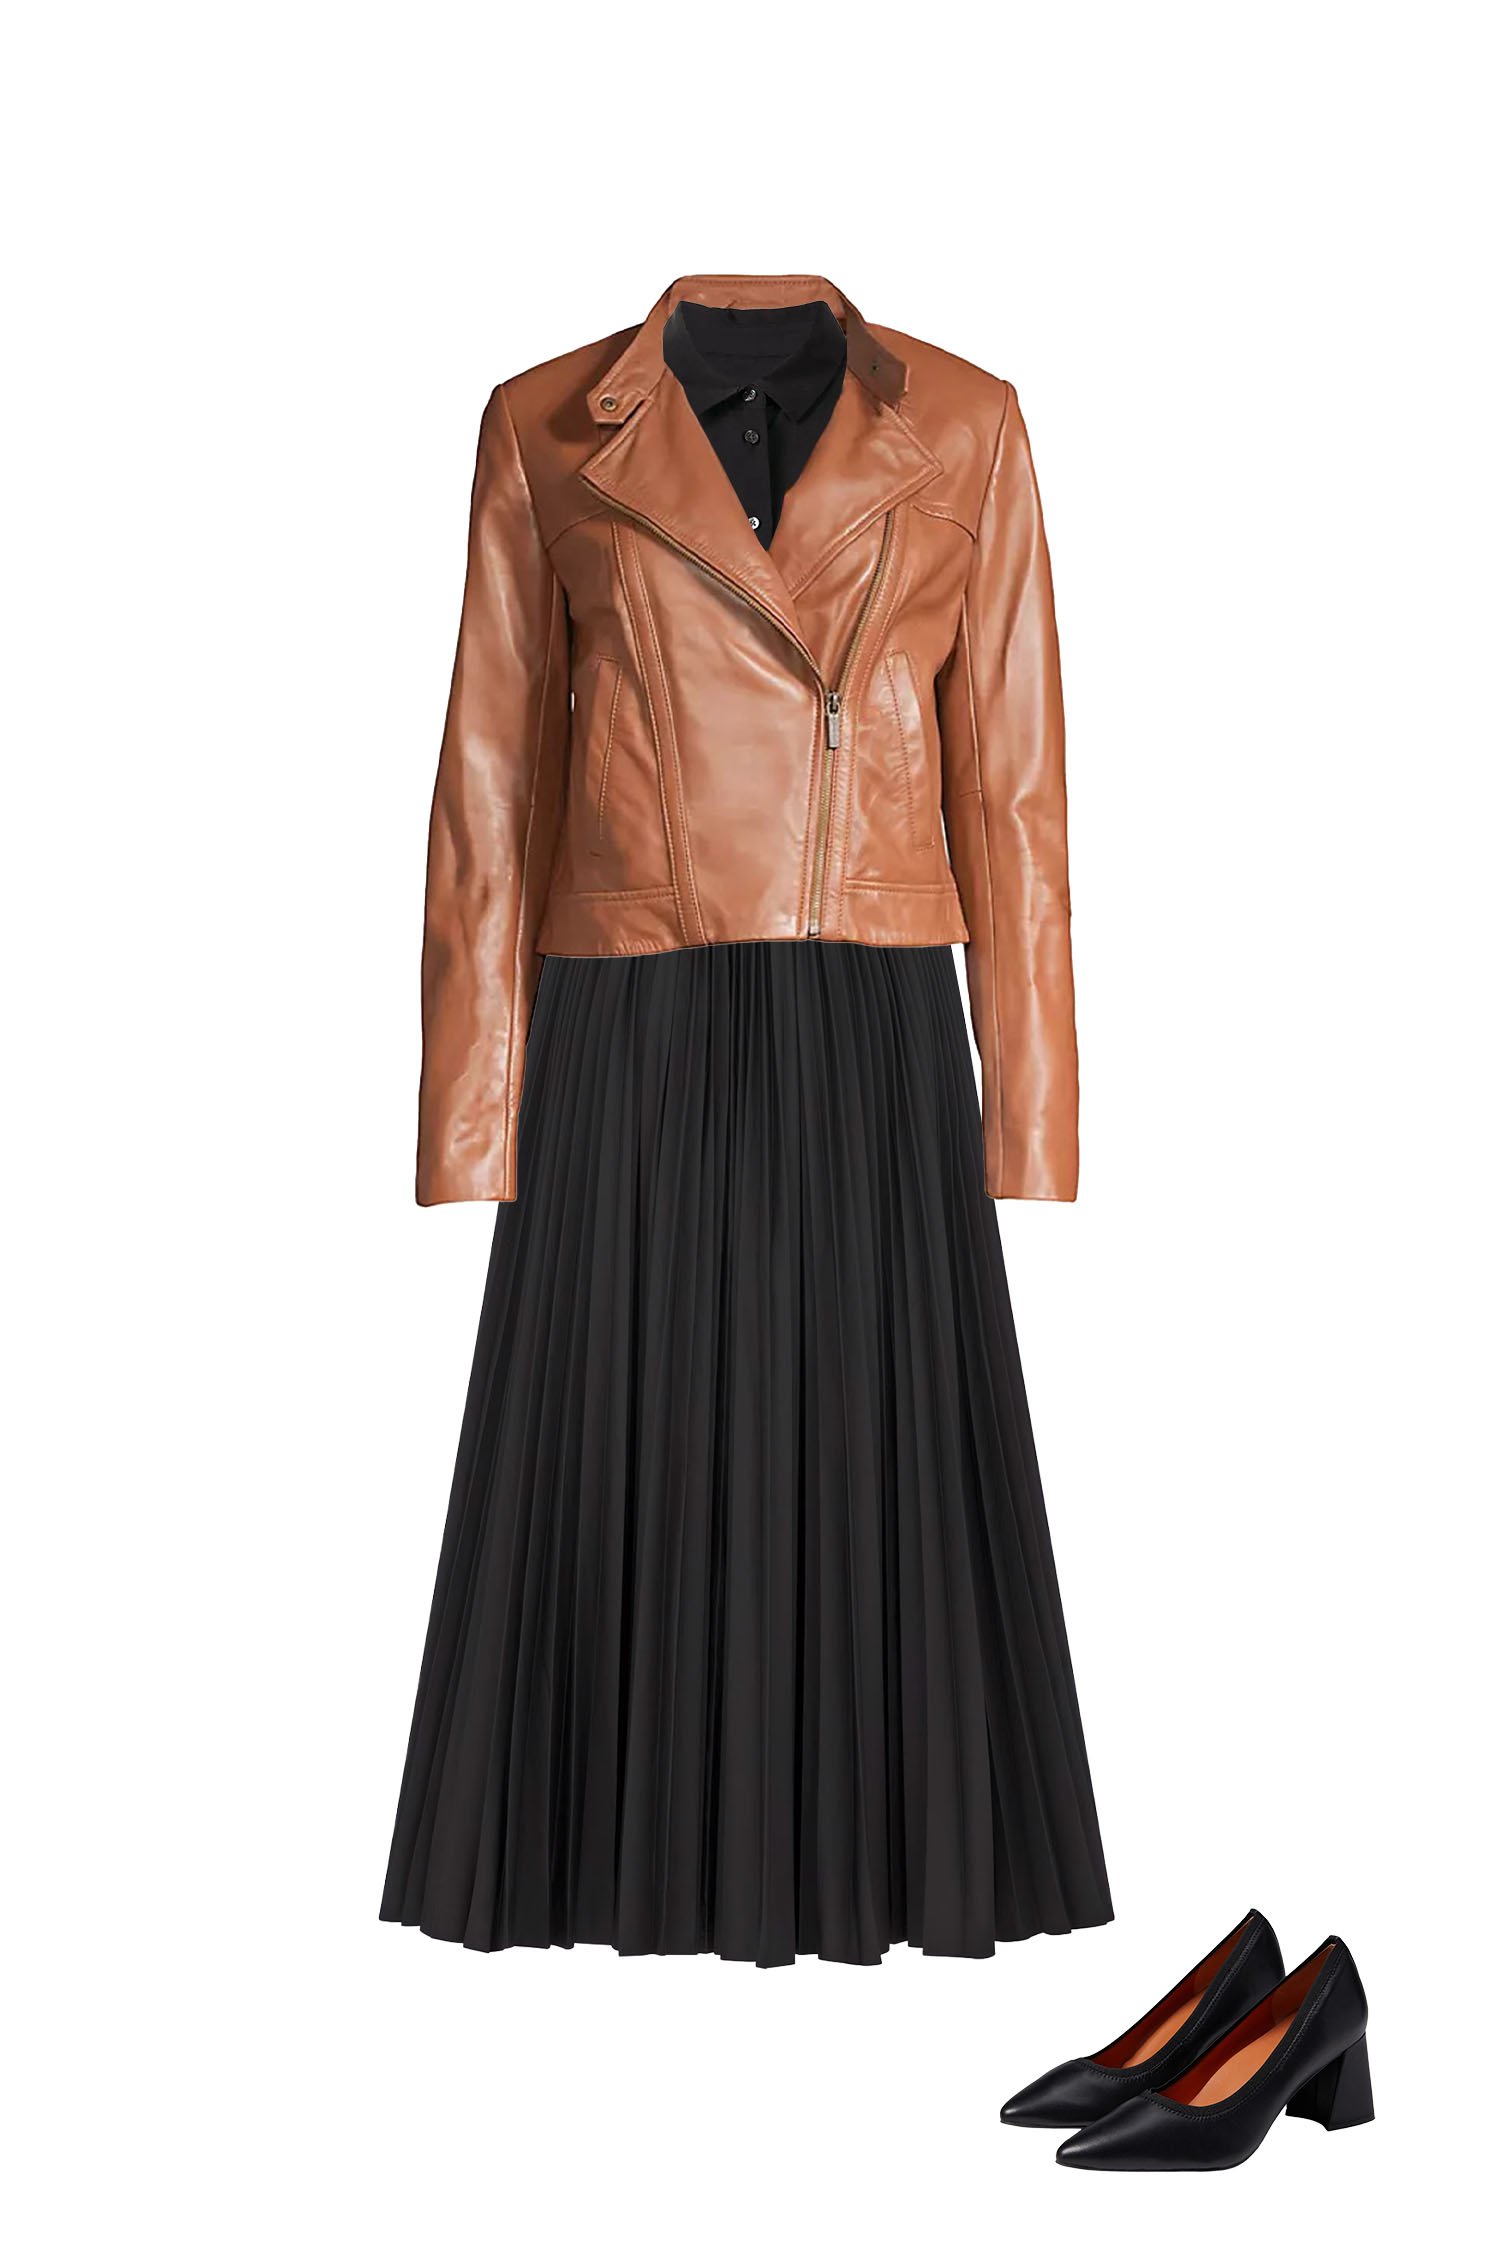 Black Pleated Skirt Outfit with Black Silk Shirt, Camel Brown Leather Jacket and Black Block Heel Pumps